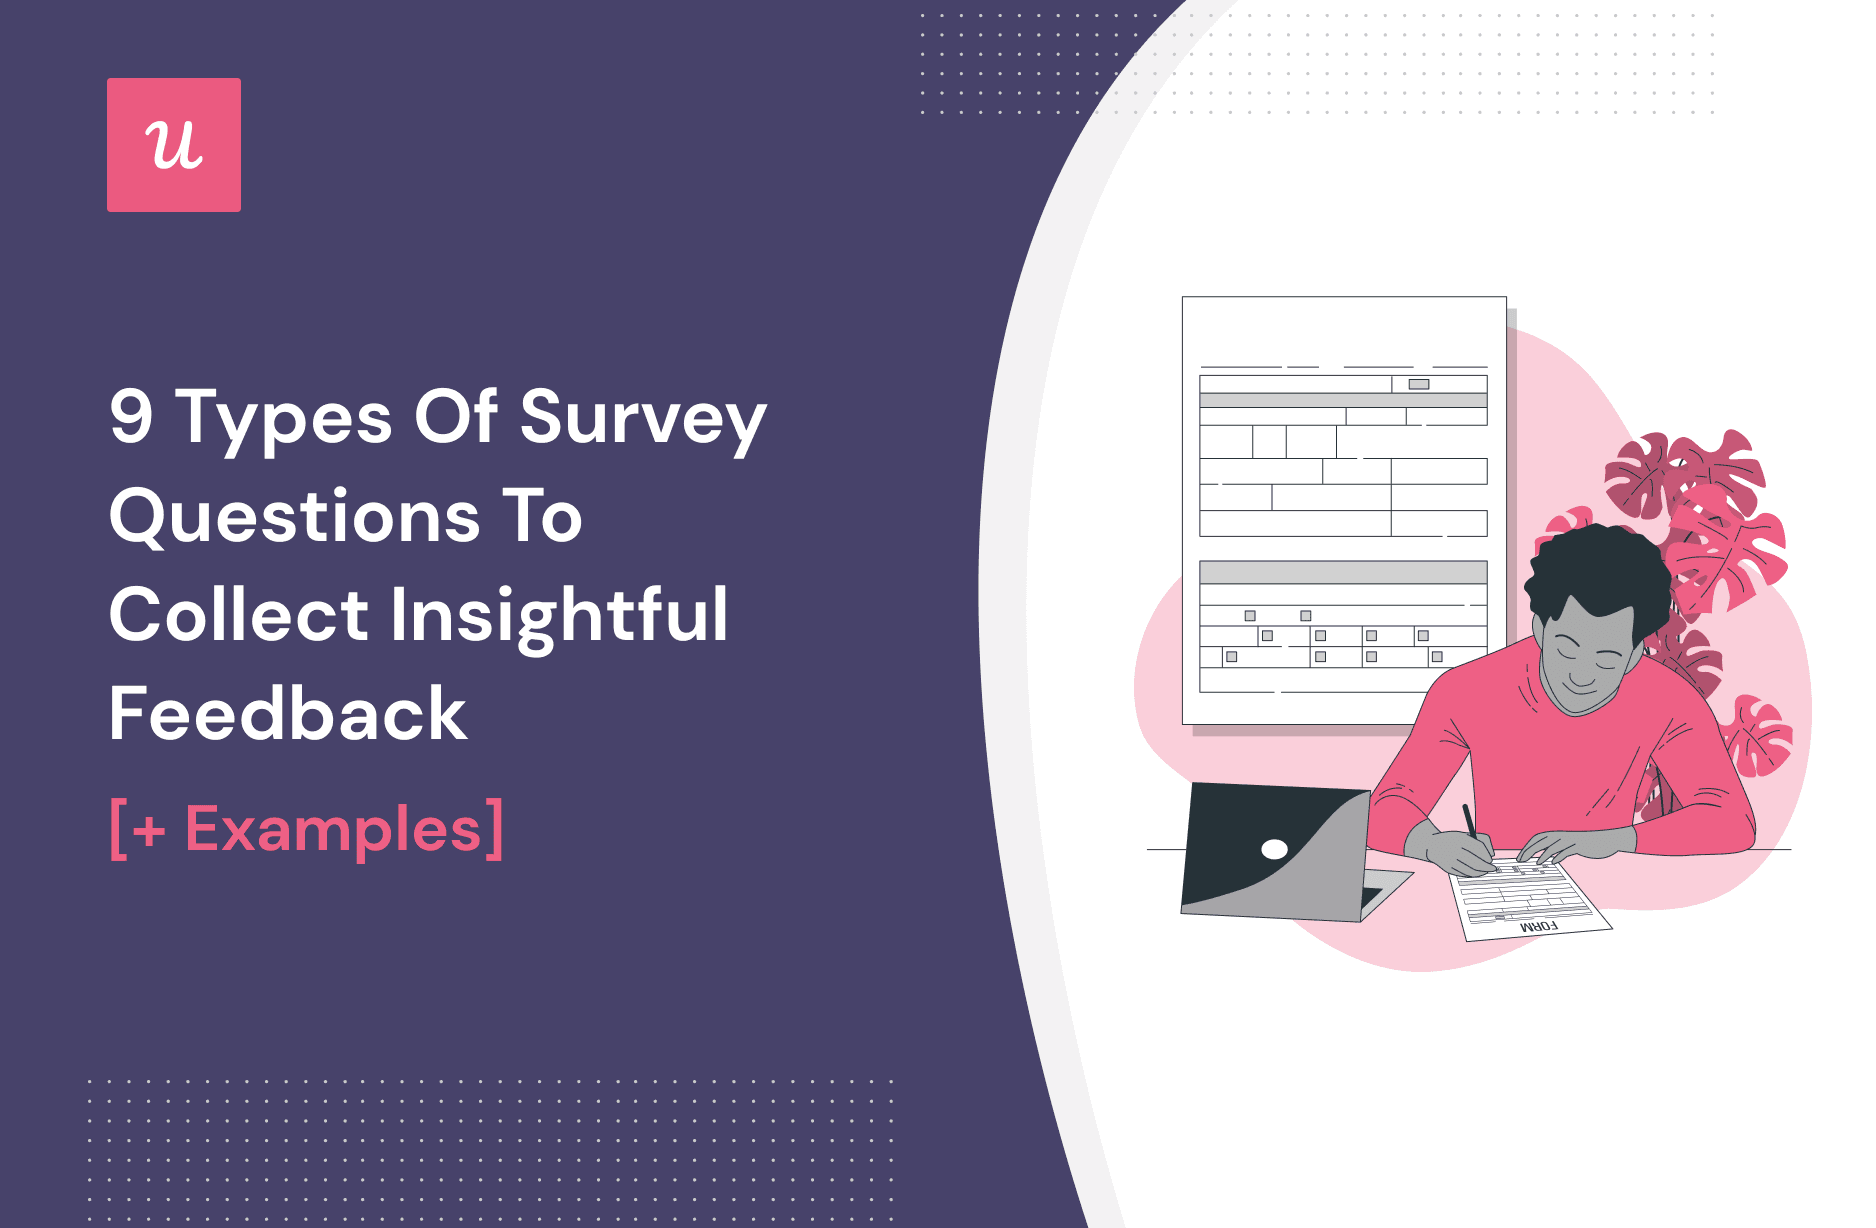 9 Types of Survey Questions to Collect Insightful Feedback [+Examples] cover